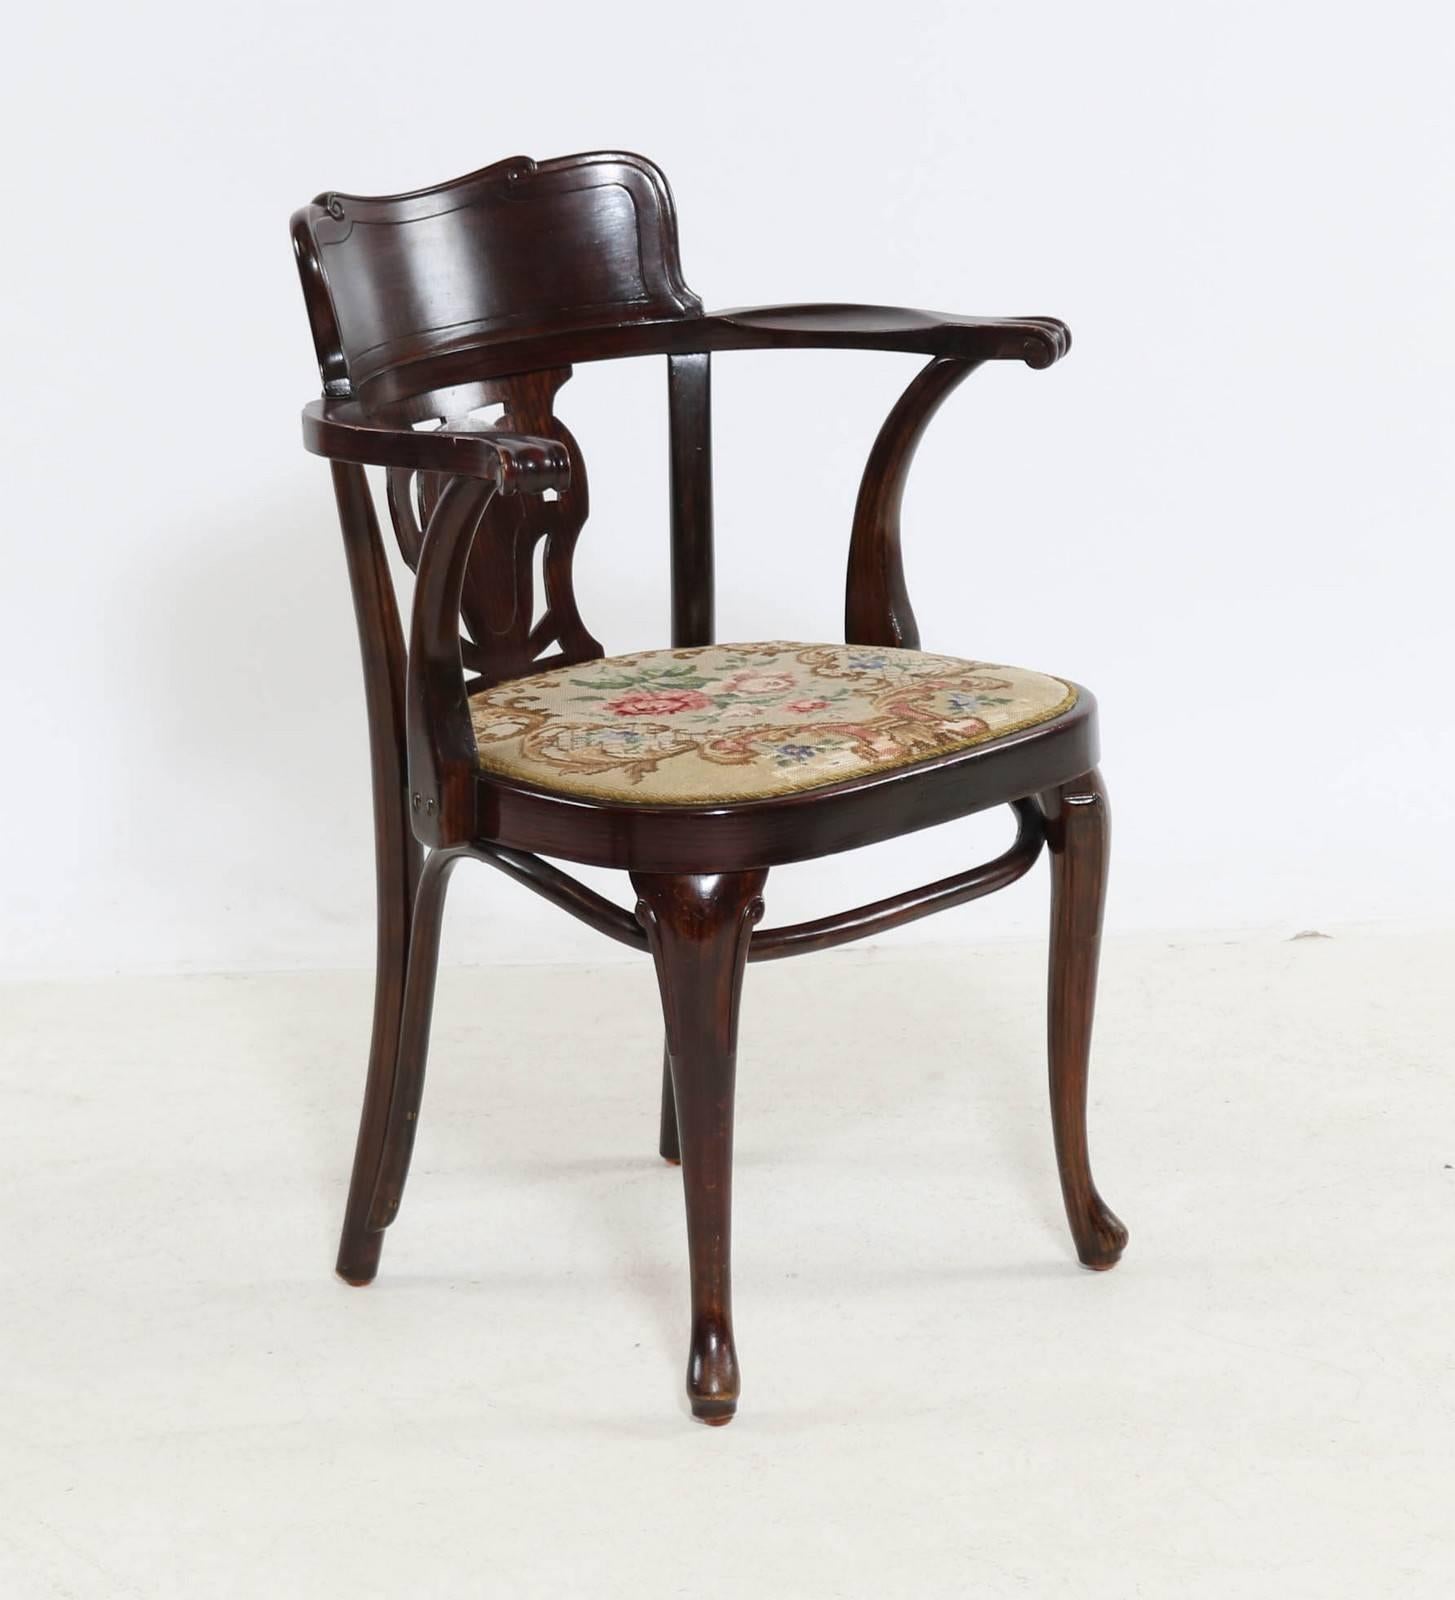 Beech bentwood dark brown stained with an upholstered seat from the late 1930s.